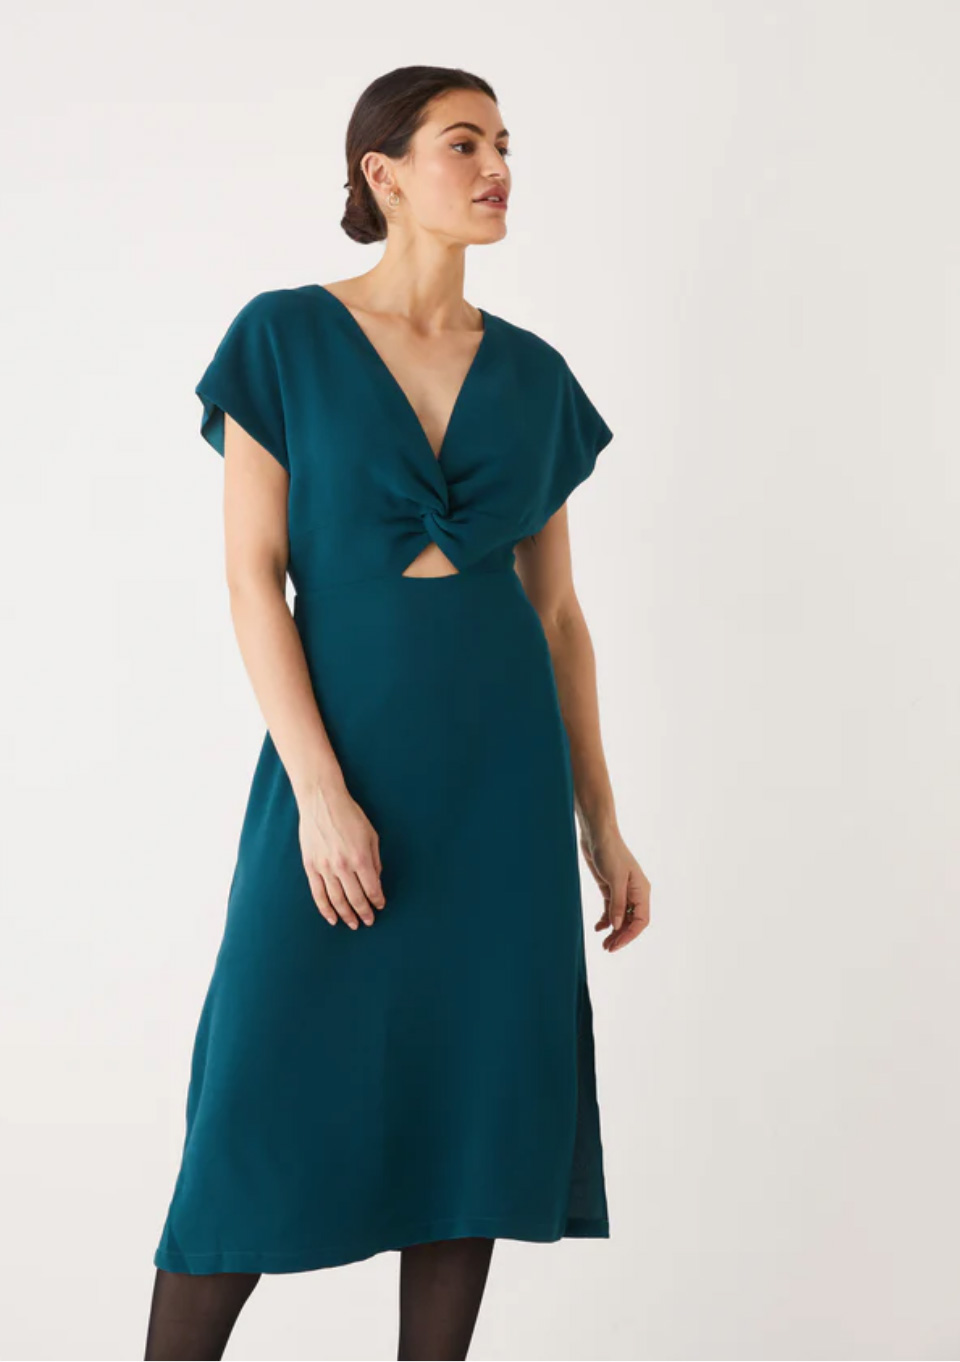 Deep Teal Cocktail Dress by Frank and Oak